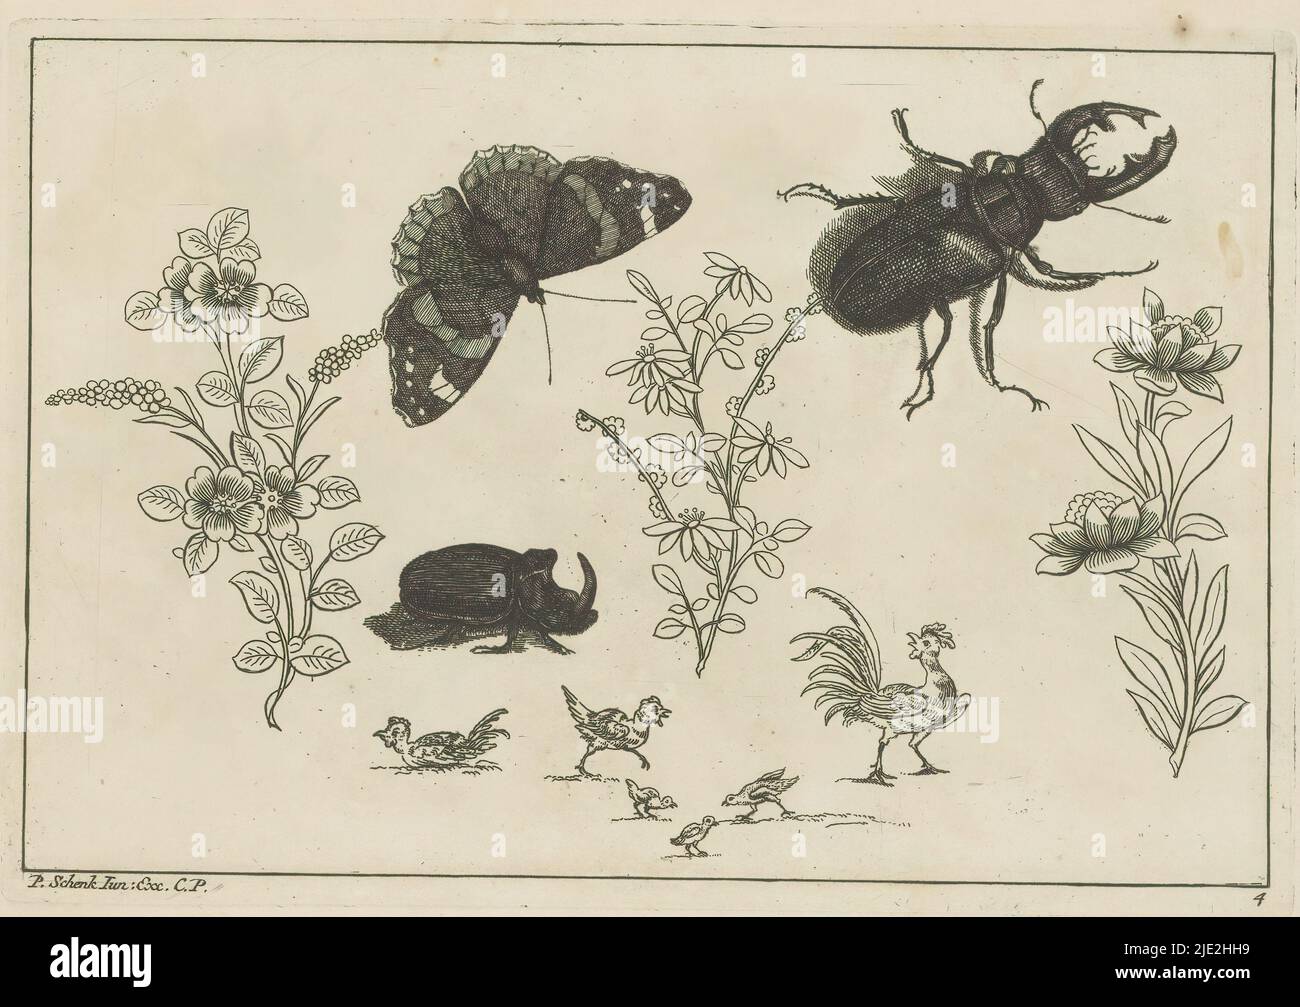 Three flower branches with rhino beetle, butterfly and beetle, Chinese flowers and insects (series title), Three flower branches with rhino beetle, butterfly and beetle. Below a chicken, rooster and chicks. Print is part of an album., print maker: Pieter Schenk (II), after design by: Pieter Schenk (II), publisher: Pieter Schenk (II), (mentioned on object), print maker: Amsterdam, publisher: Leipzig, 1727 - 1775, paper, etching, height 167 mm × width 244 mm Stock Photo